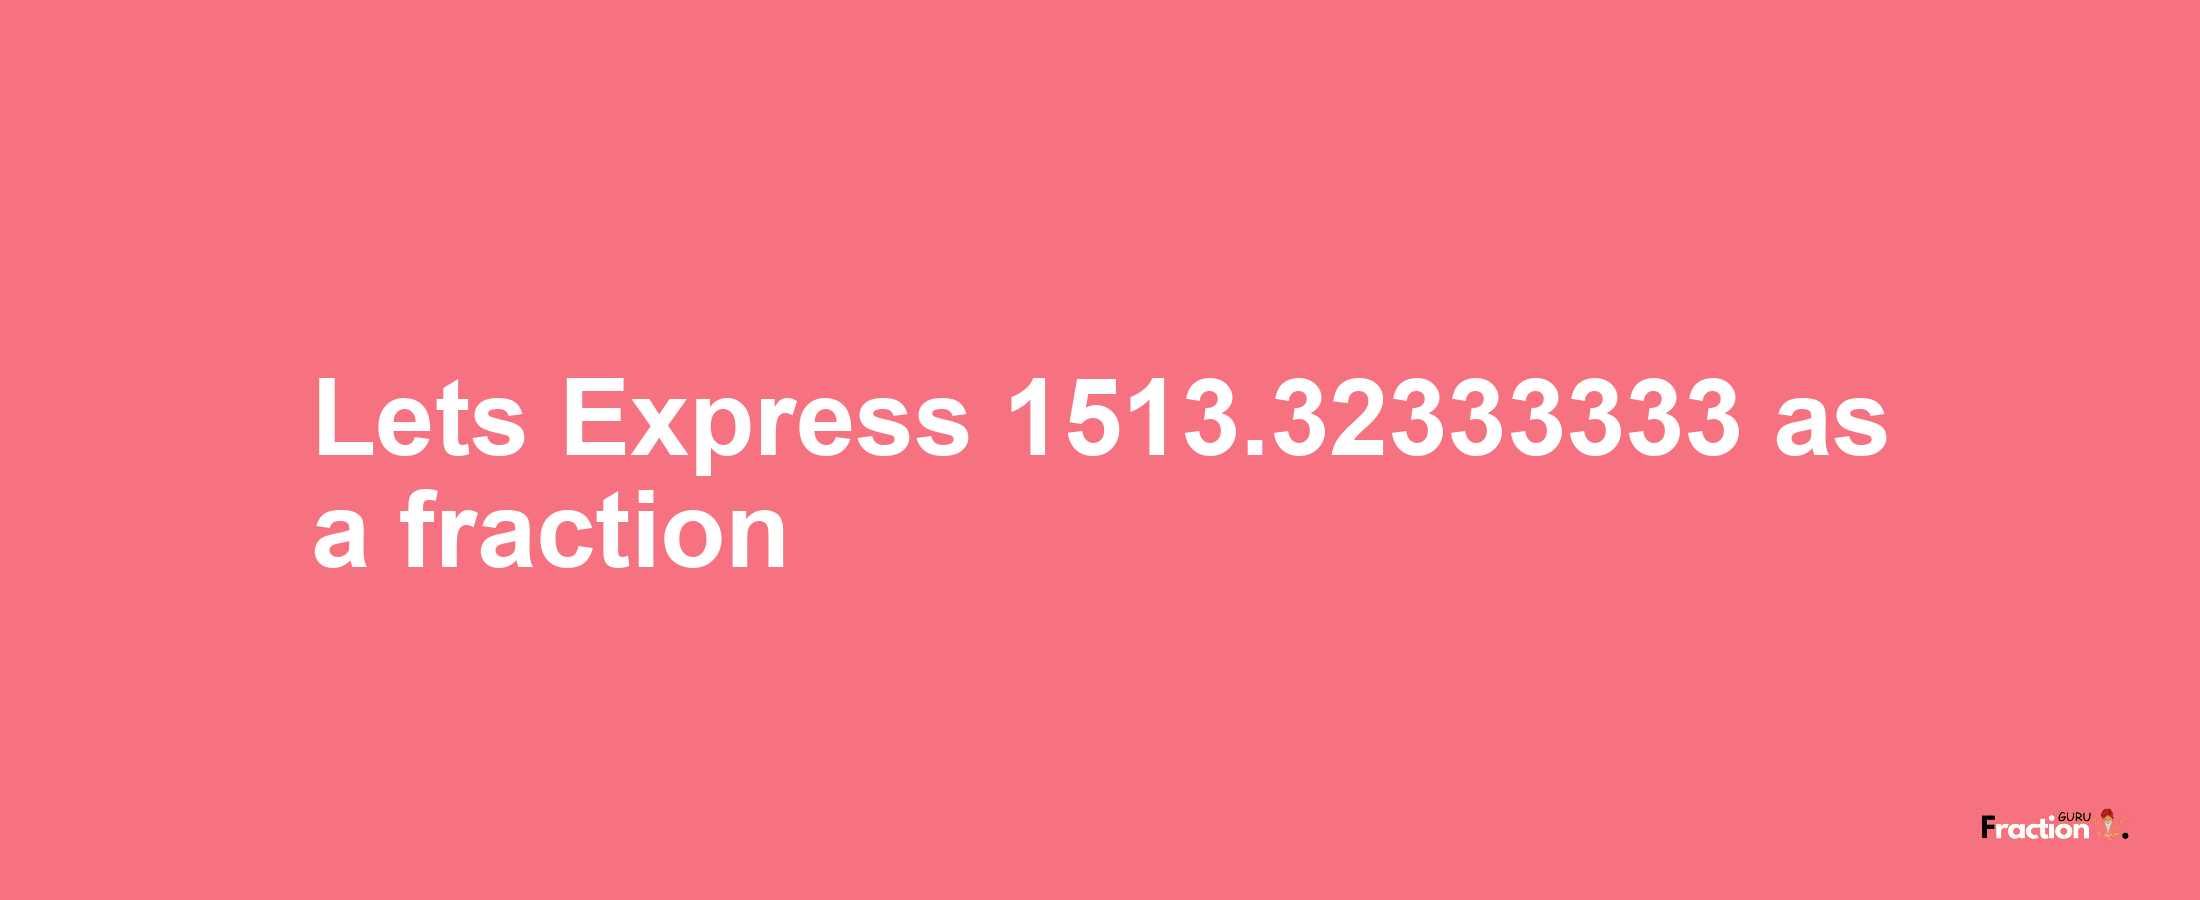 Lets Express 1513.32333333 as afraction